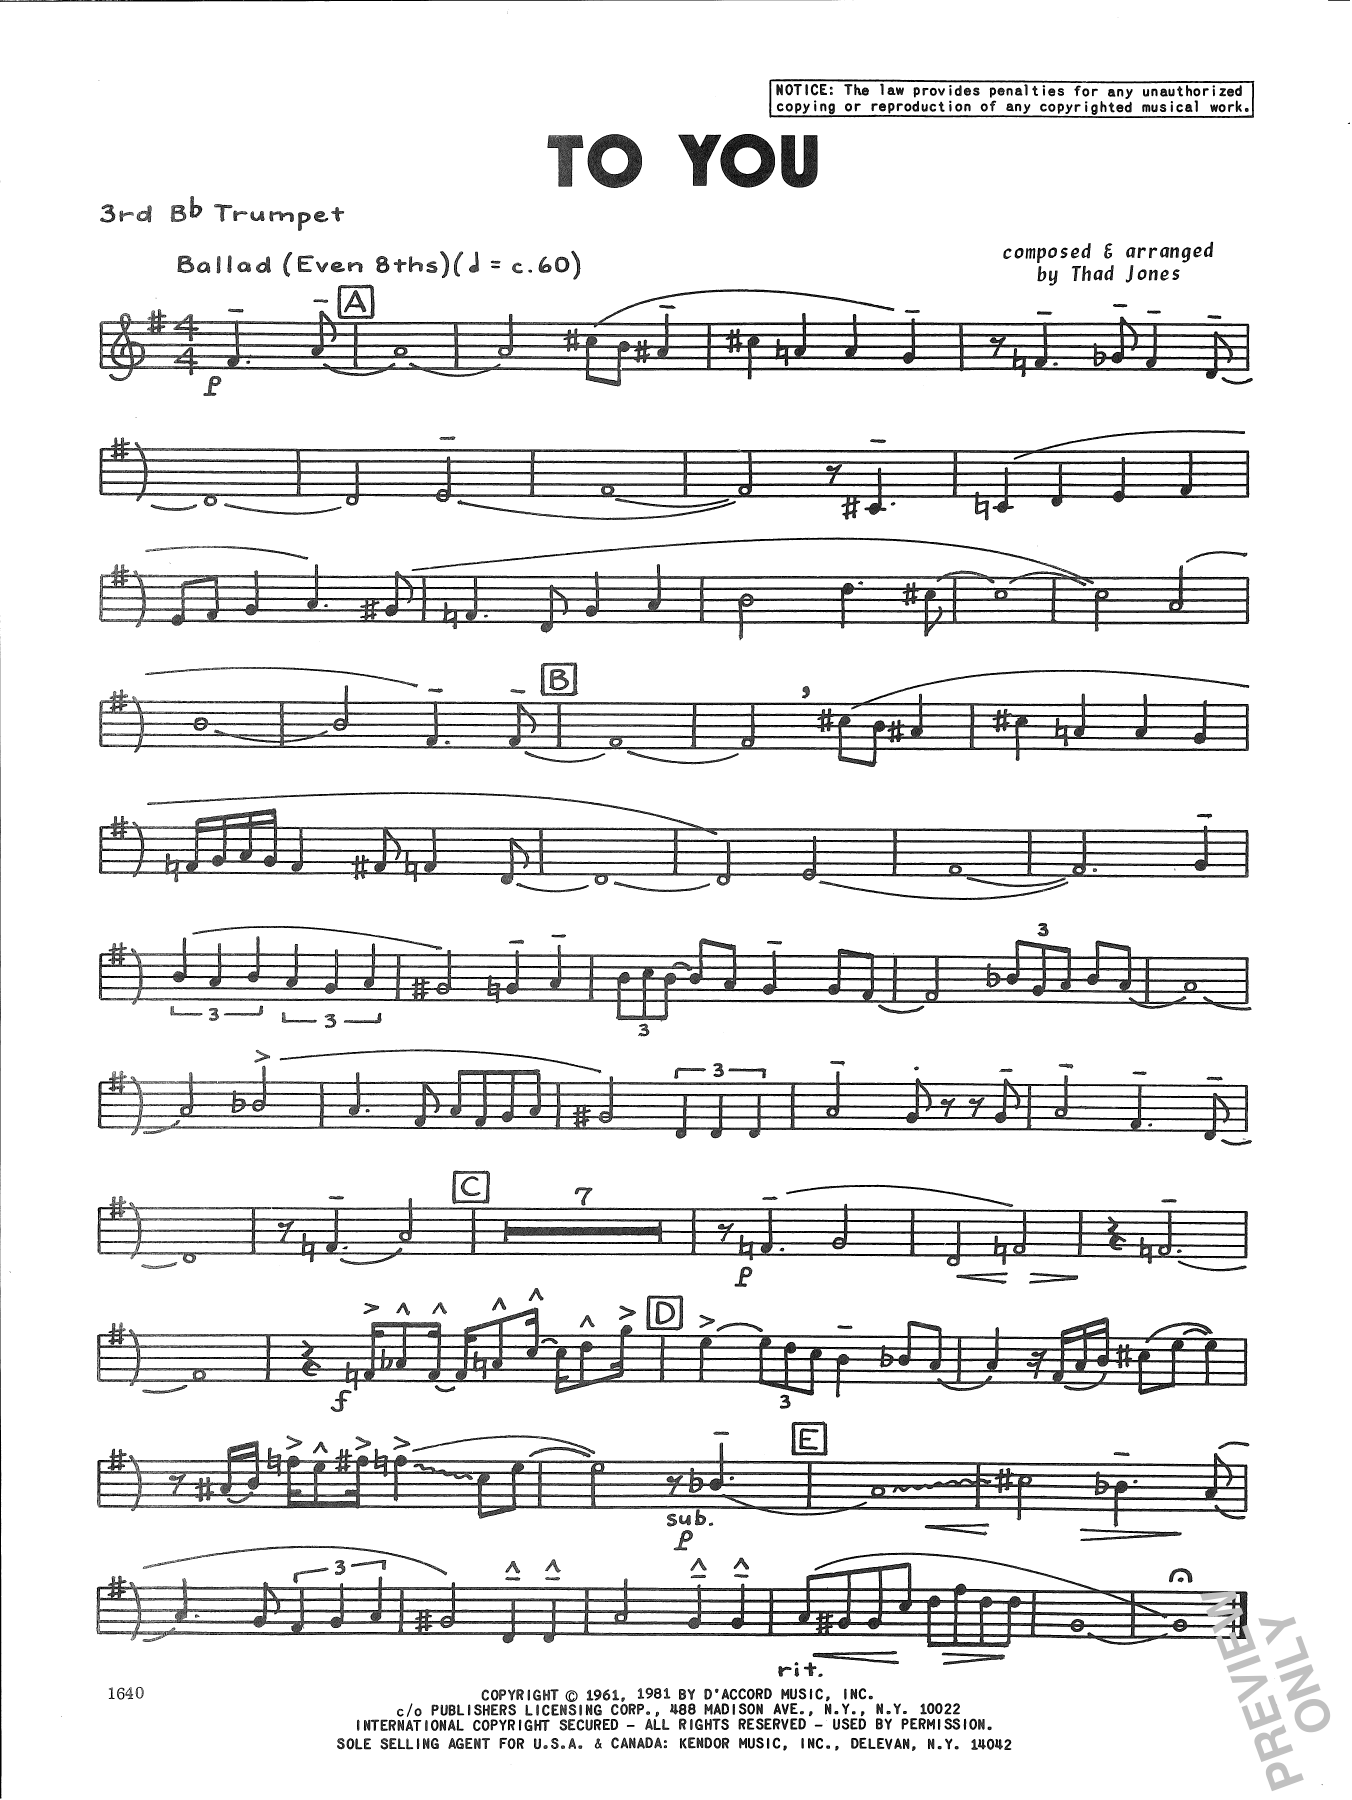 Download Thad Jones To You - 3rd Bb Trumpet Sheet Music